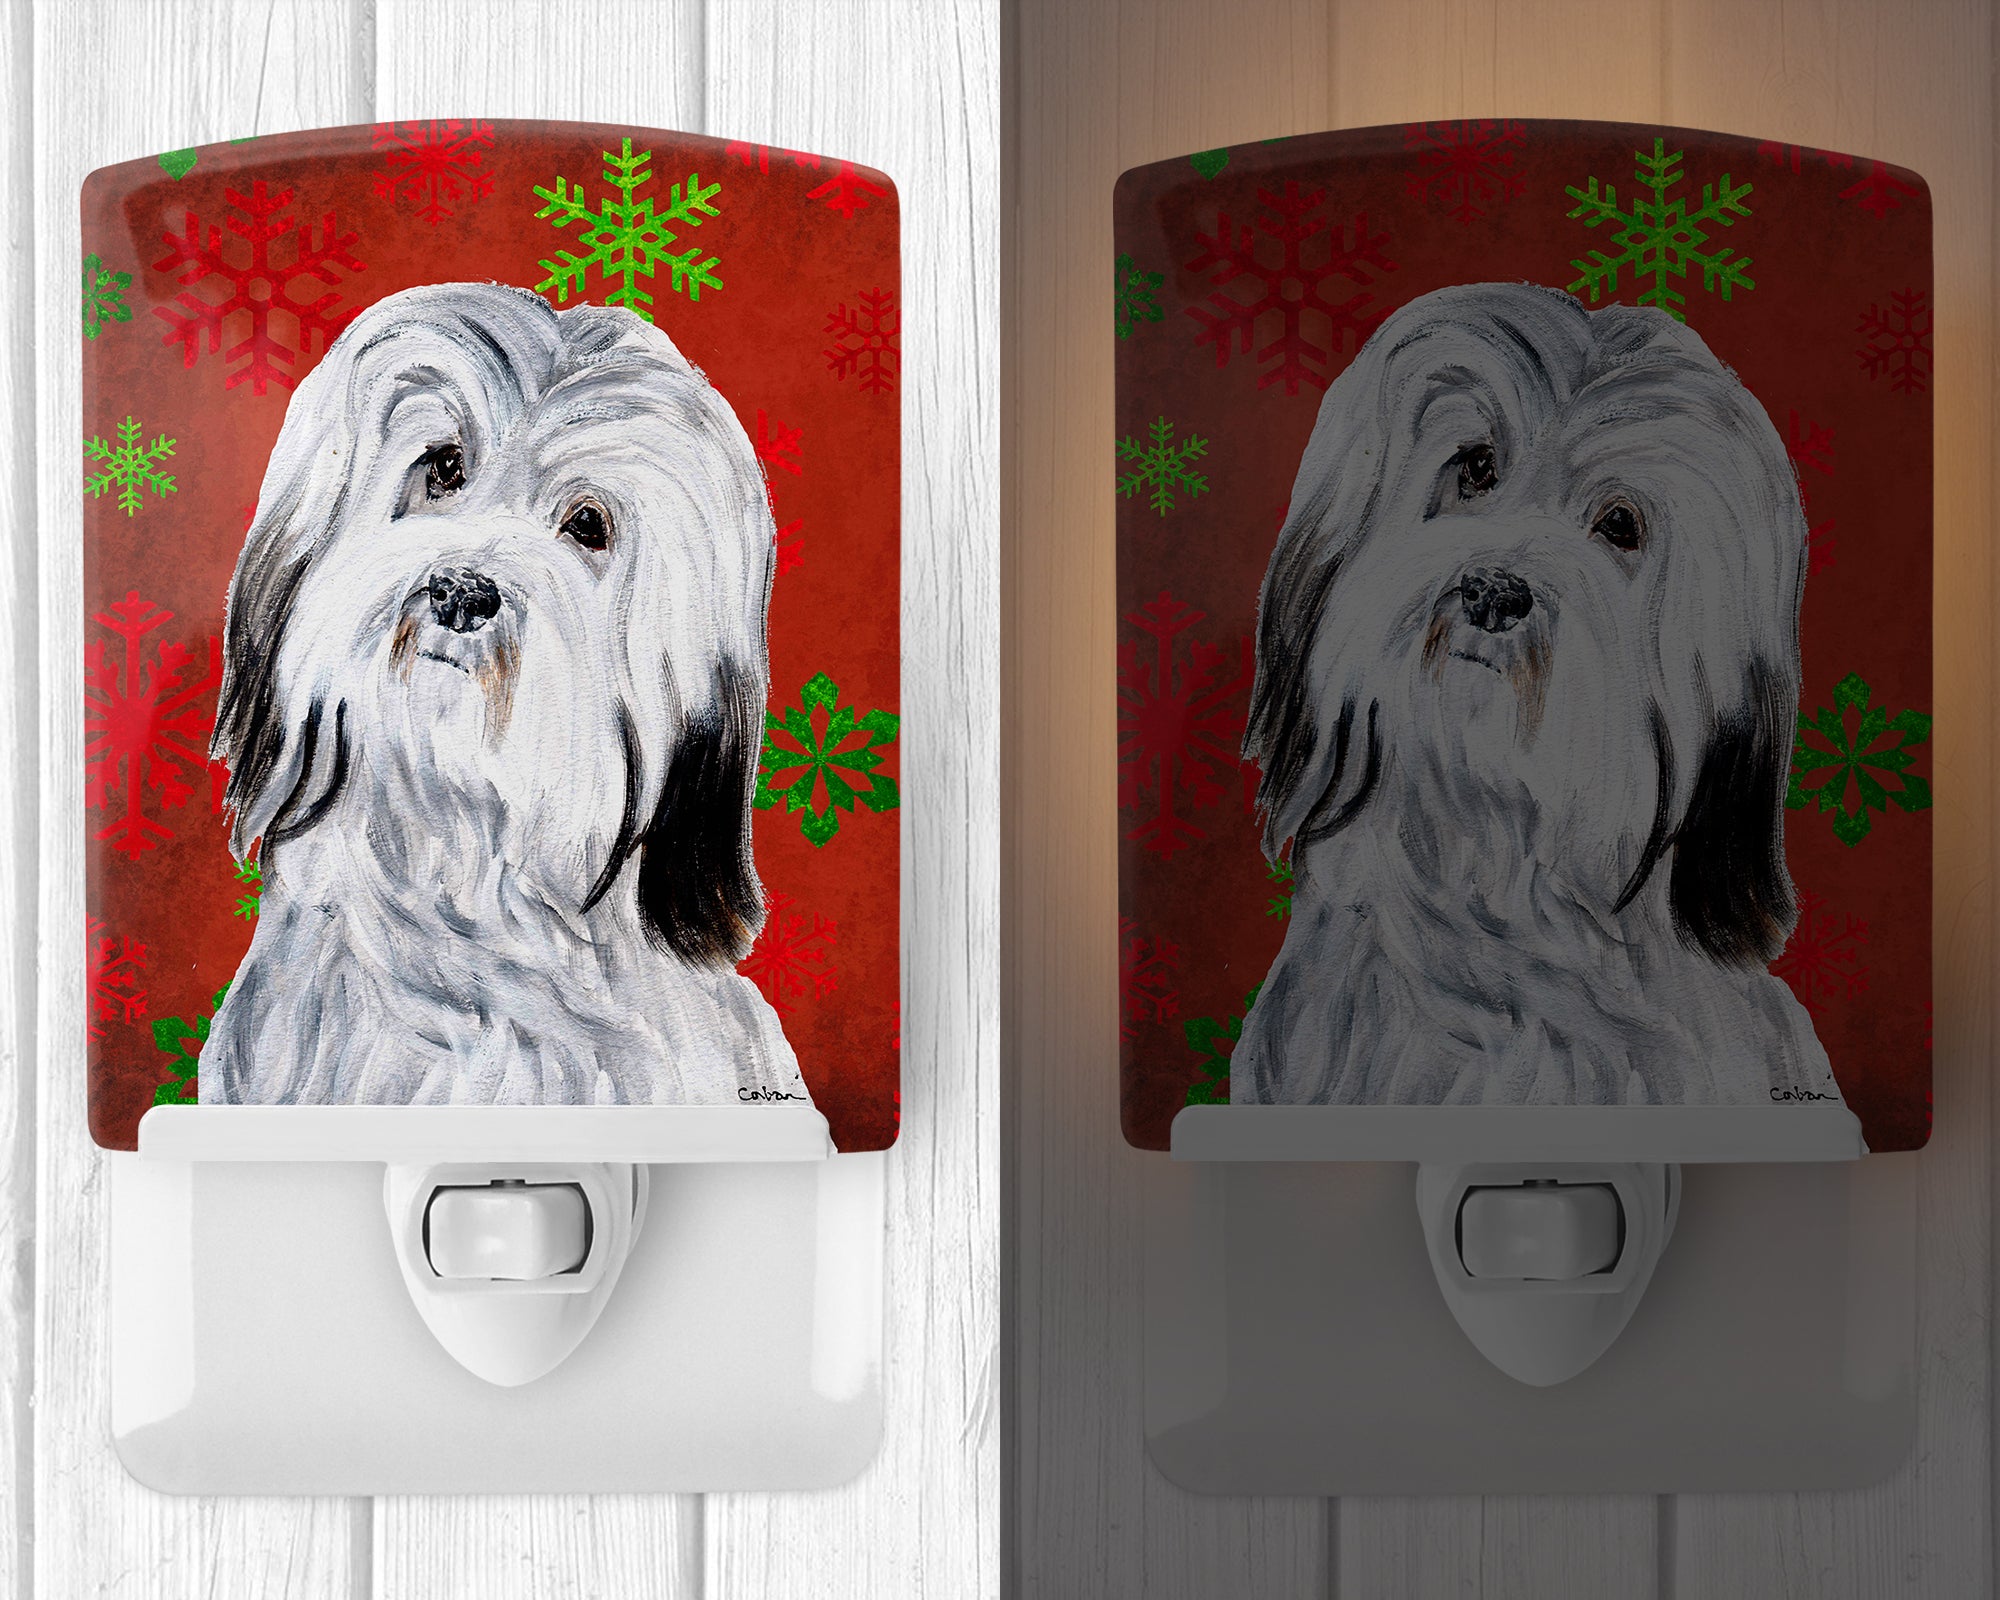 Havanese Red Snowflakes Holiday Ceramic Night Light SC9761CNL - the-store.com